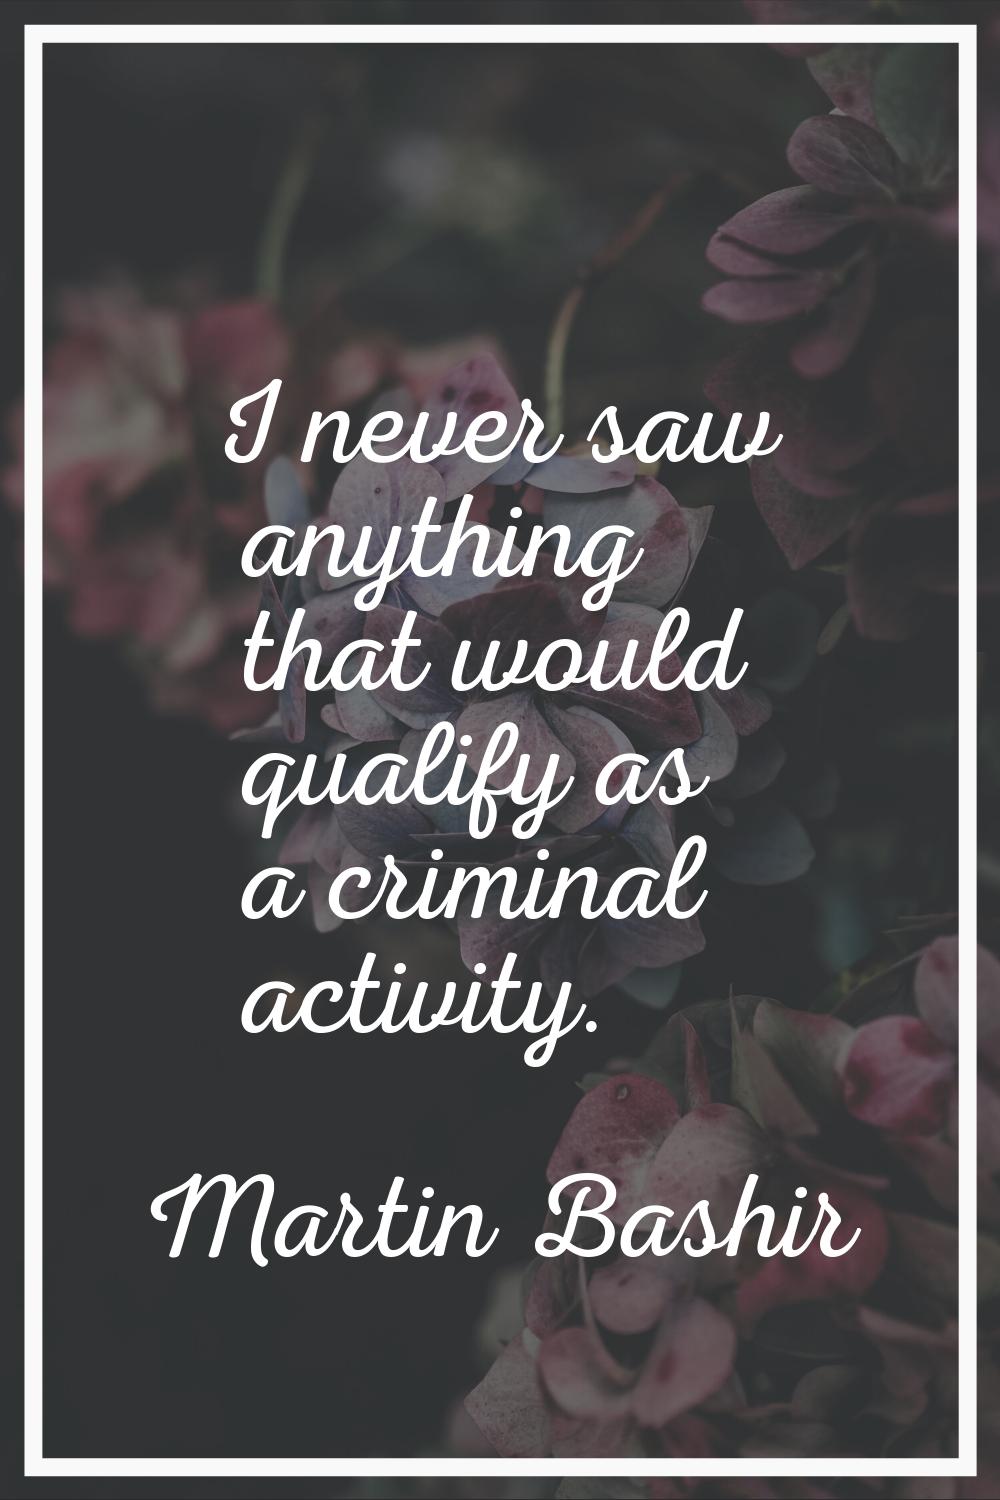 I never saw anything that would qualify as a criminal activity.